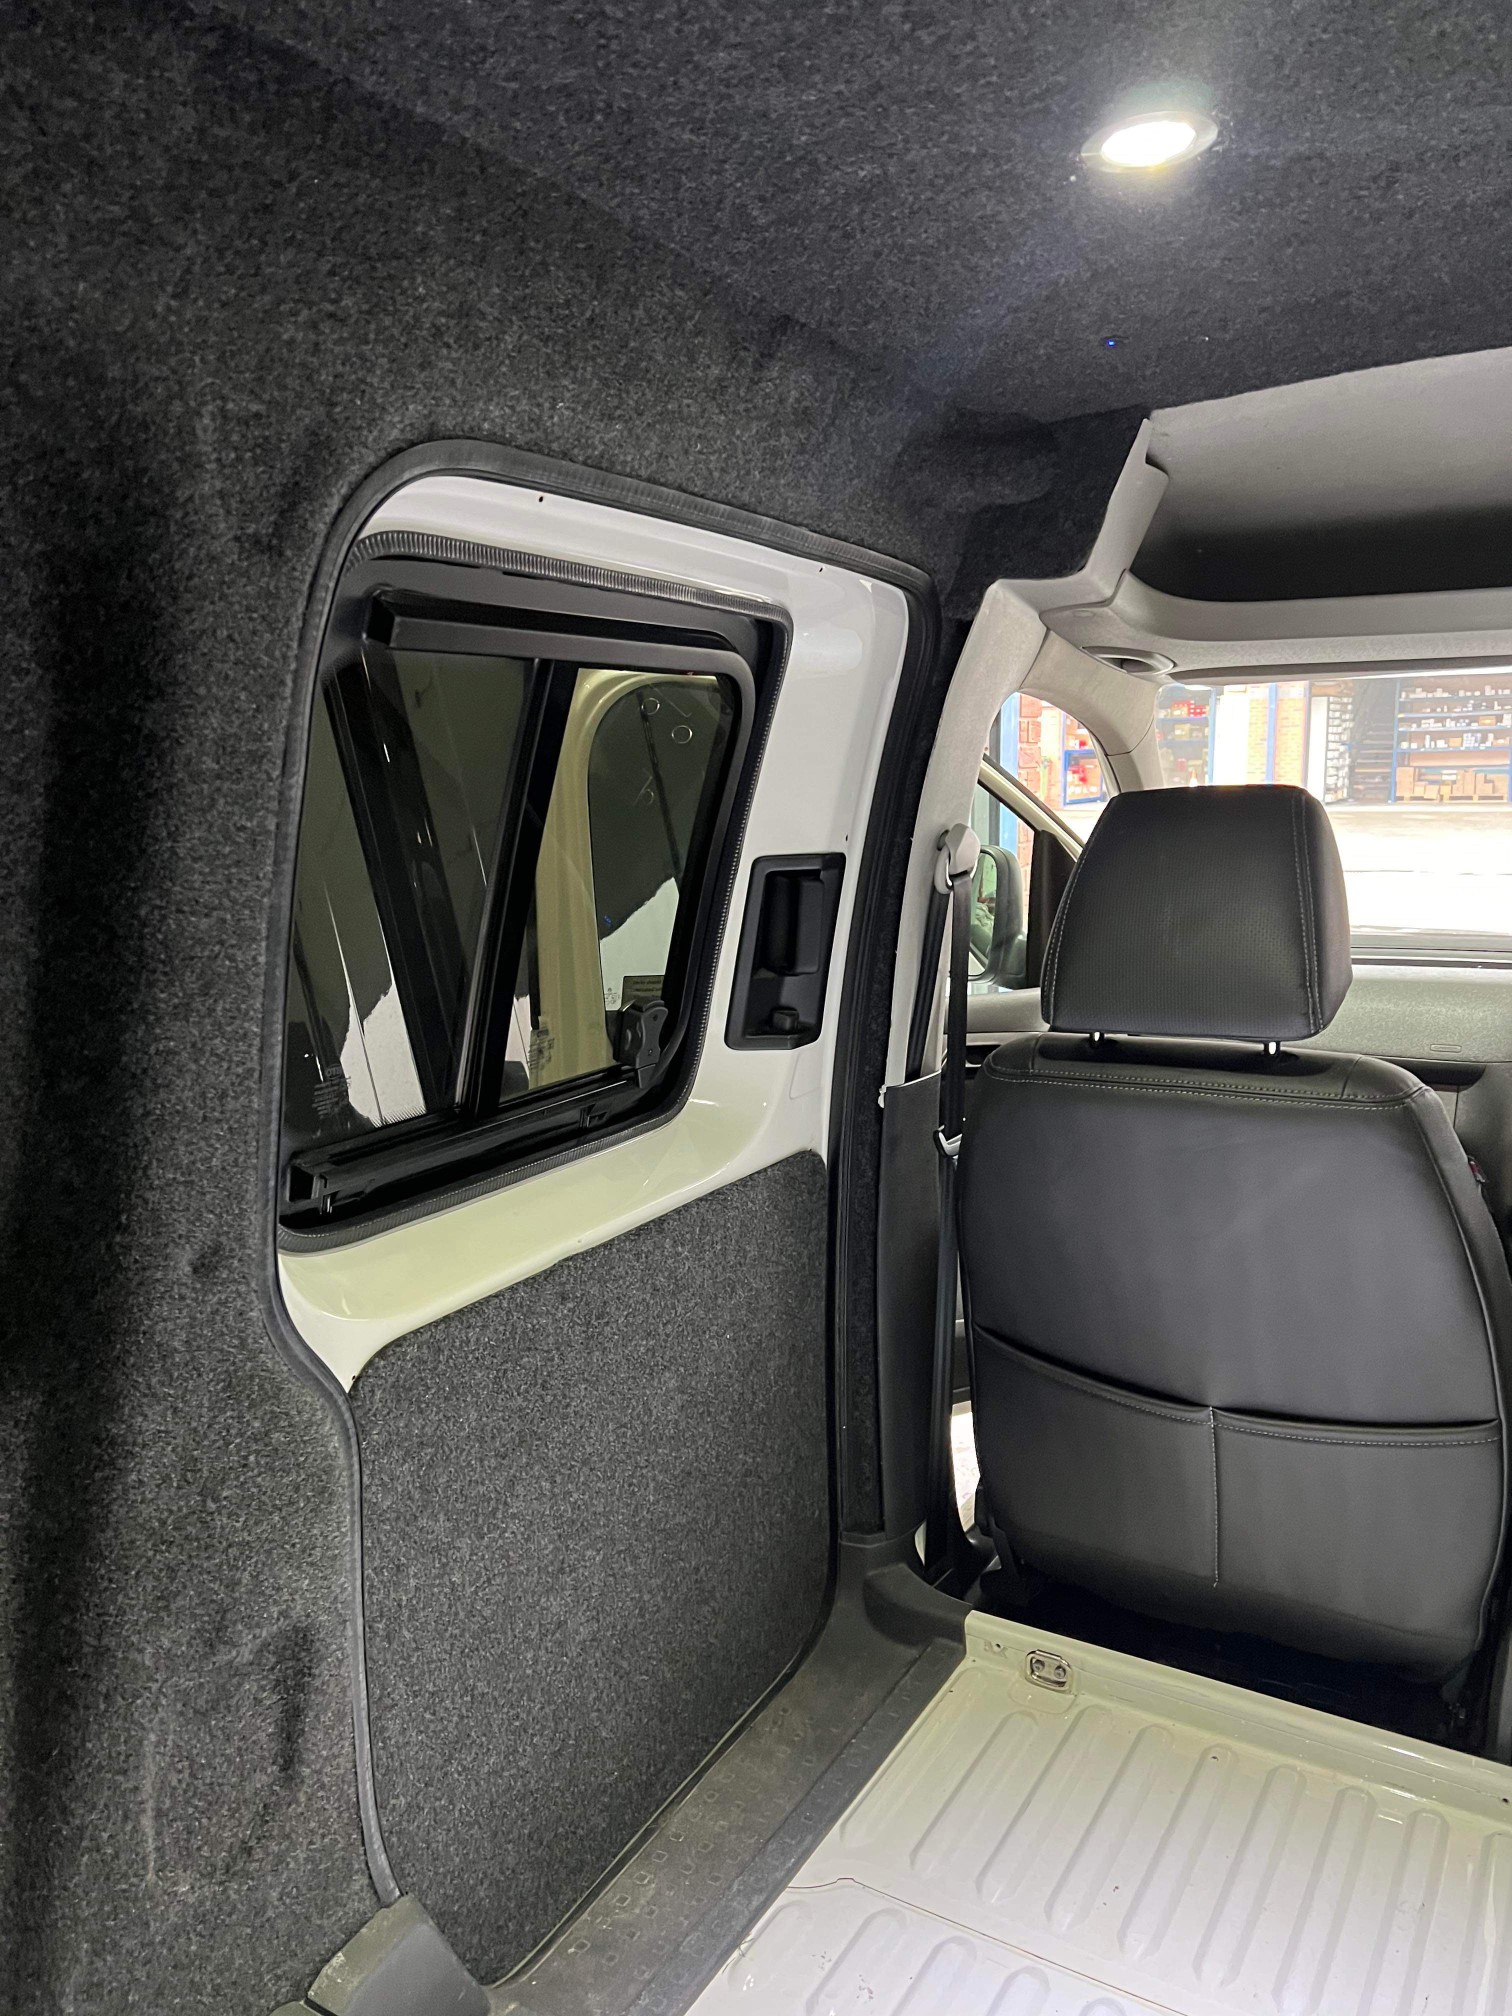 VW Caddy, Windows, insulation, carpet, lights, floor and Altro flooring, fit ( (6)